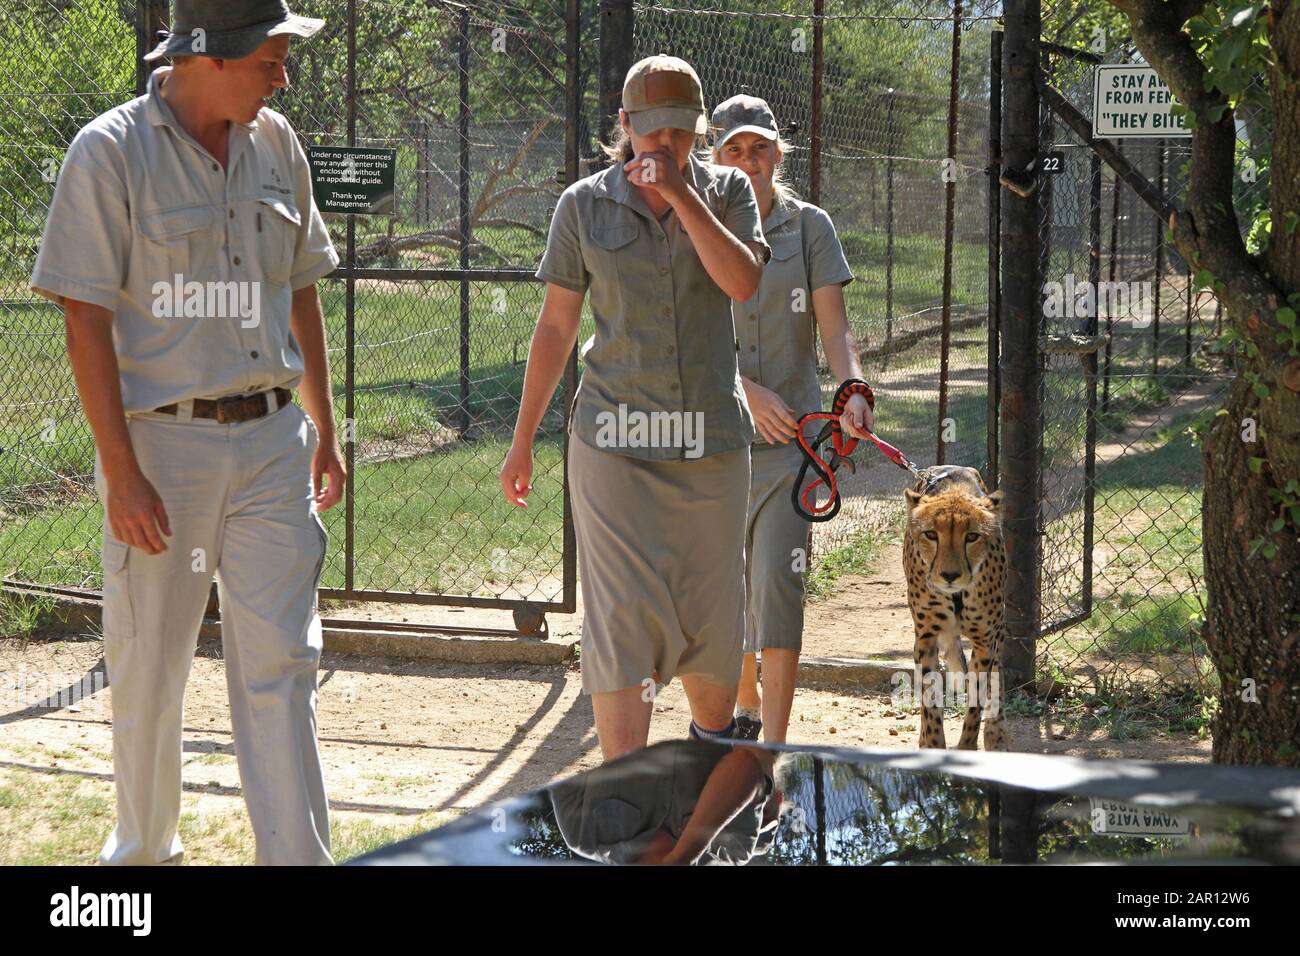 Game rangers in enclosure with cheetah on a leash, Hoedspruit Endangered Species Centre, Hazyview, Mpumalanga, South Africa. Stock Photo